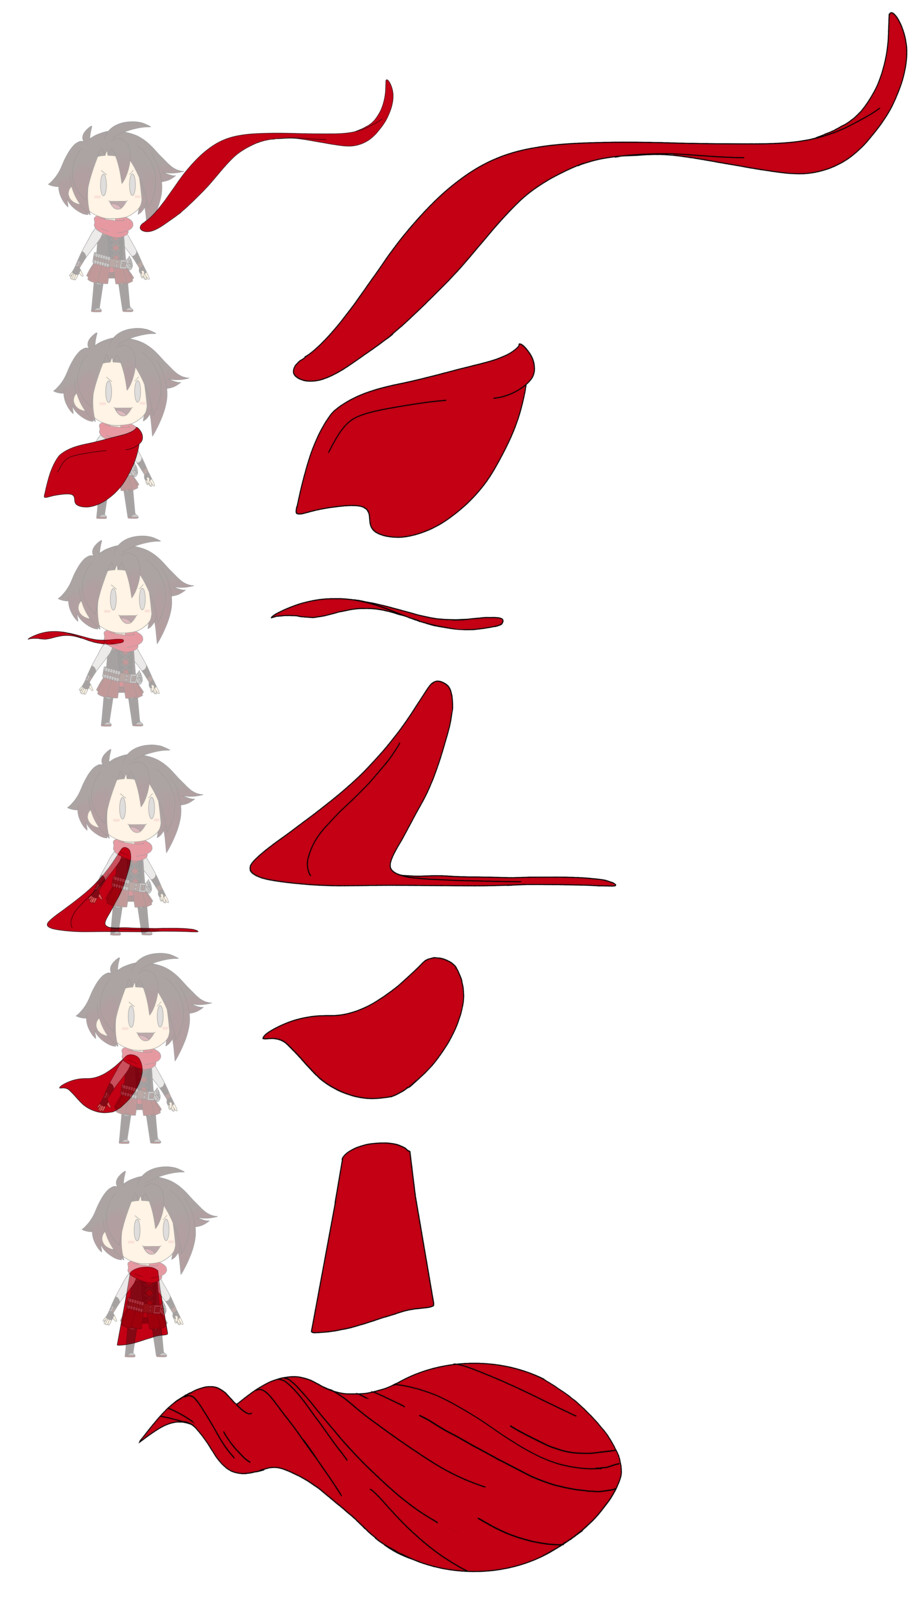 key pose reference of Ruby's cape